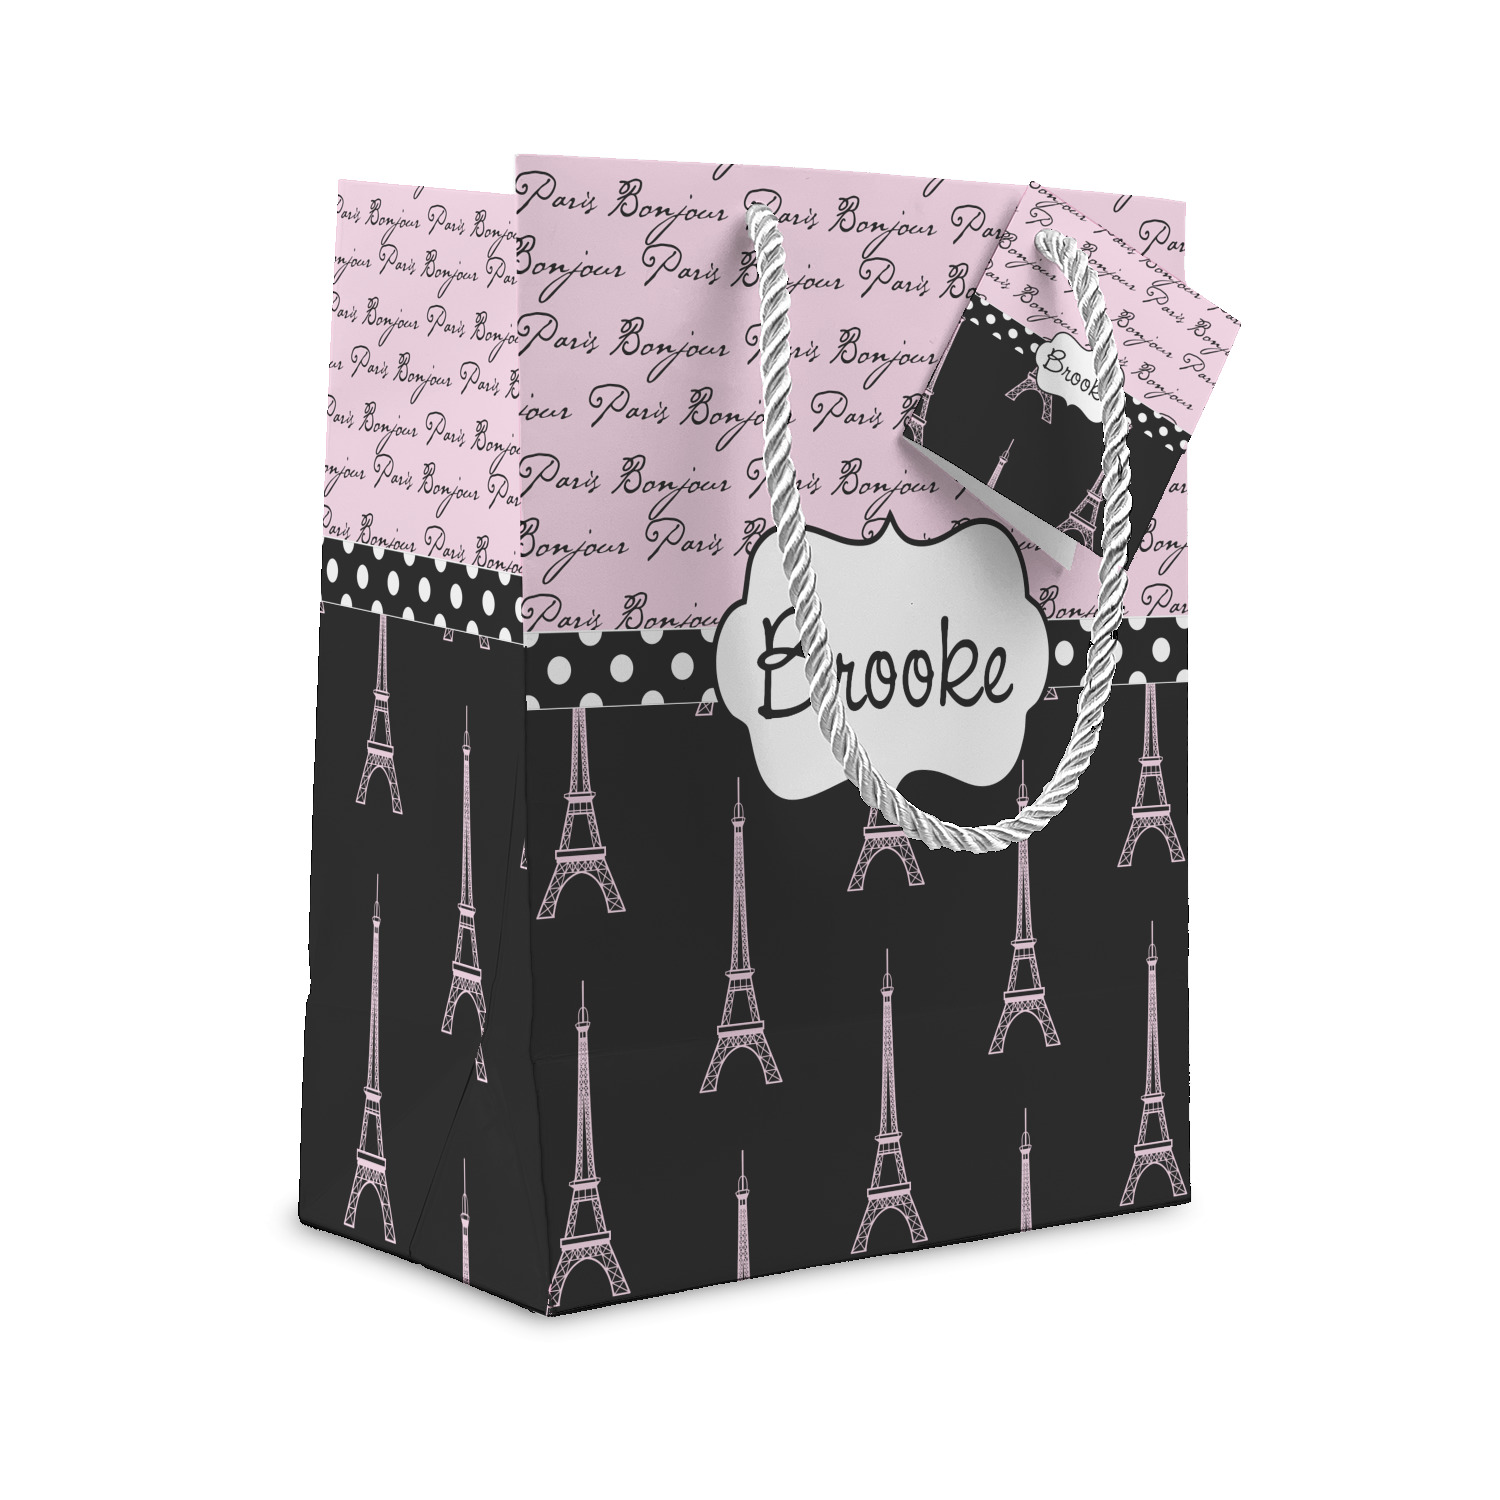 Personalized Eiffel tower Gifts | IGP Personalized Gifts